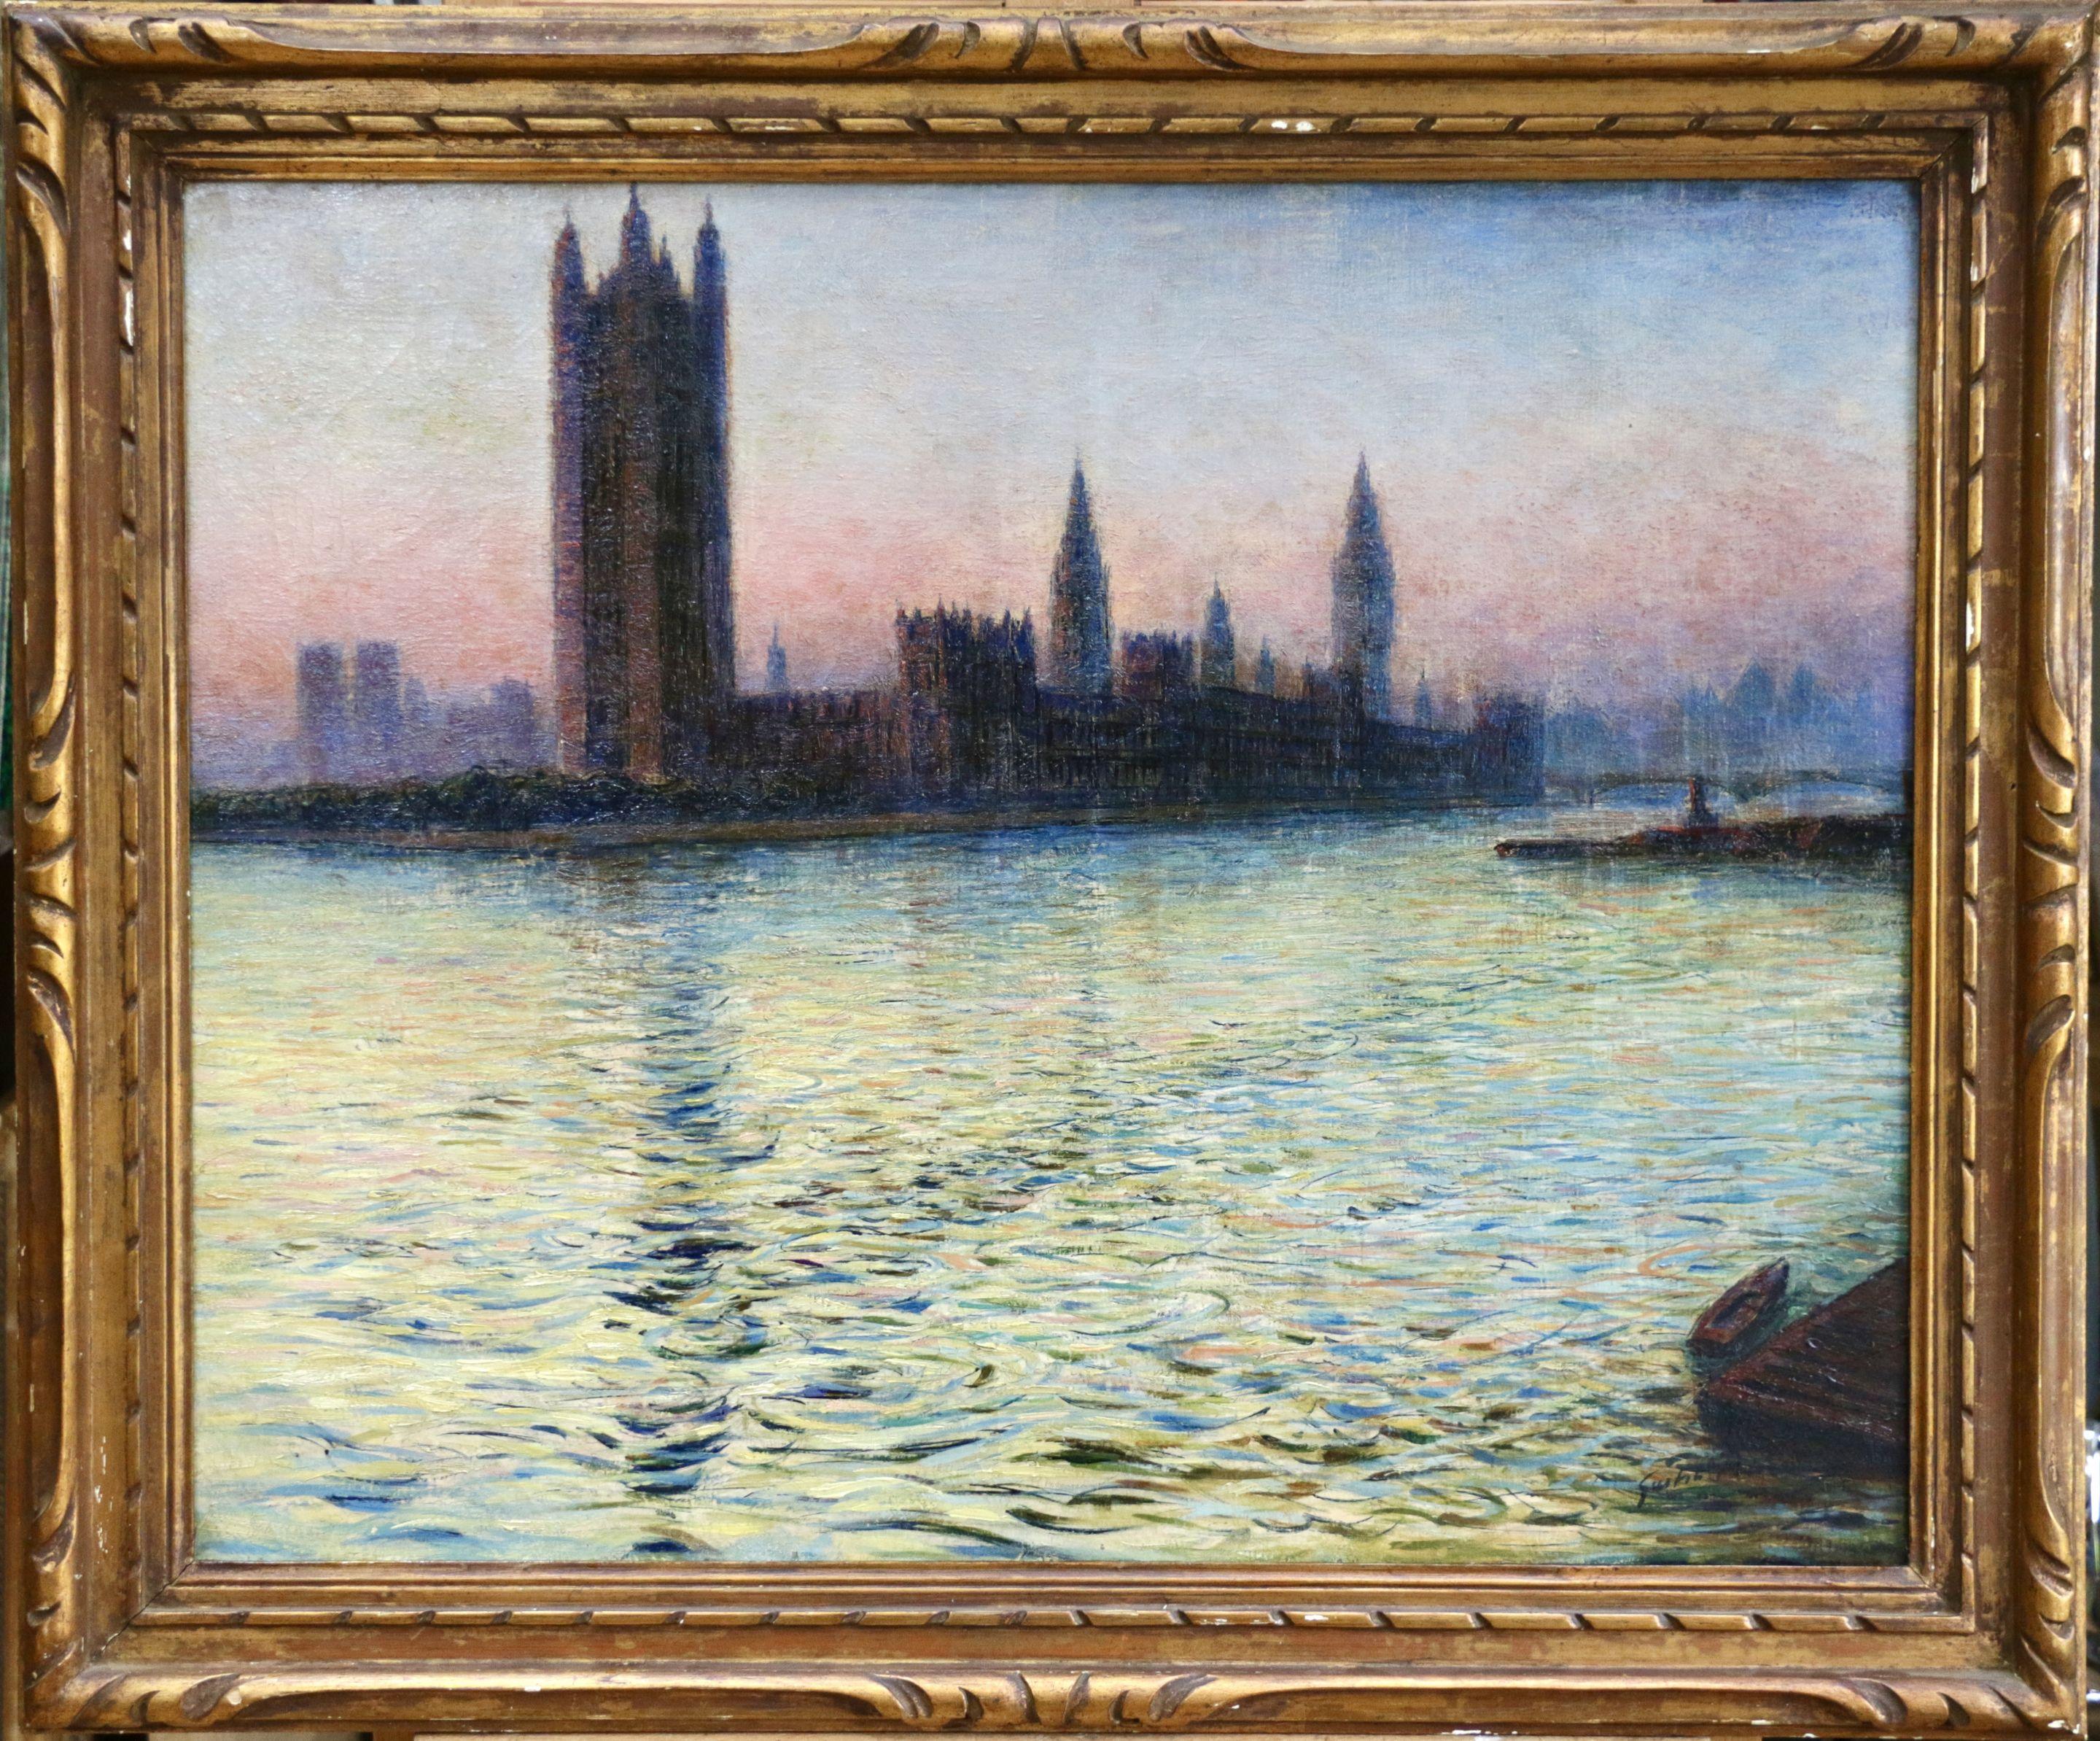 Wonderful oil on canvas circa 1905 by Gaston Prunier depicting a view of the River Thames in London as the sun sets behind Westminster. Signed lower left and titled verso. Framed dimensions are 31 inches high by 37 inches wide.

Gaston Prunier was a